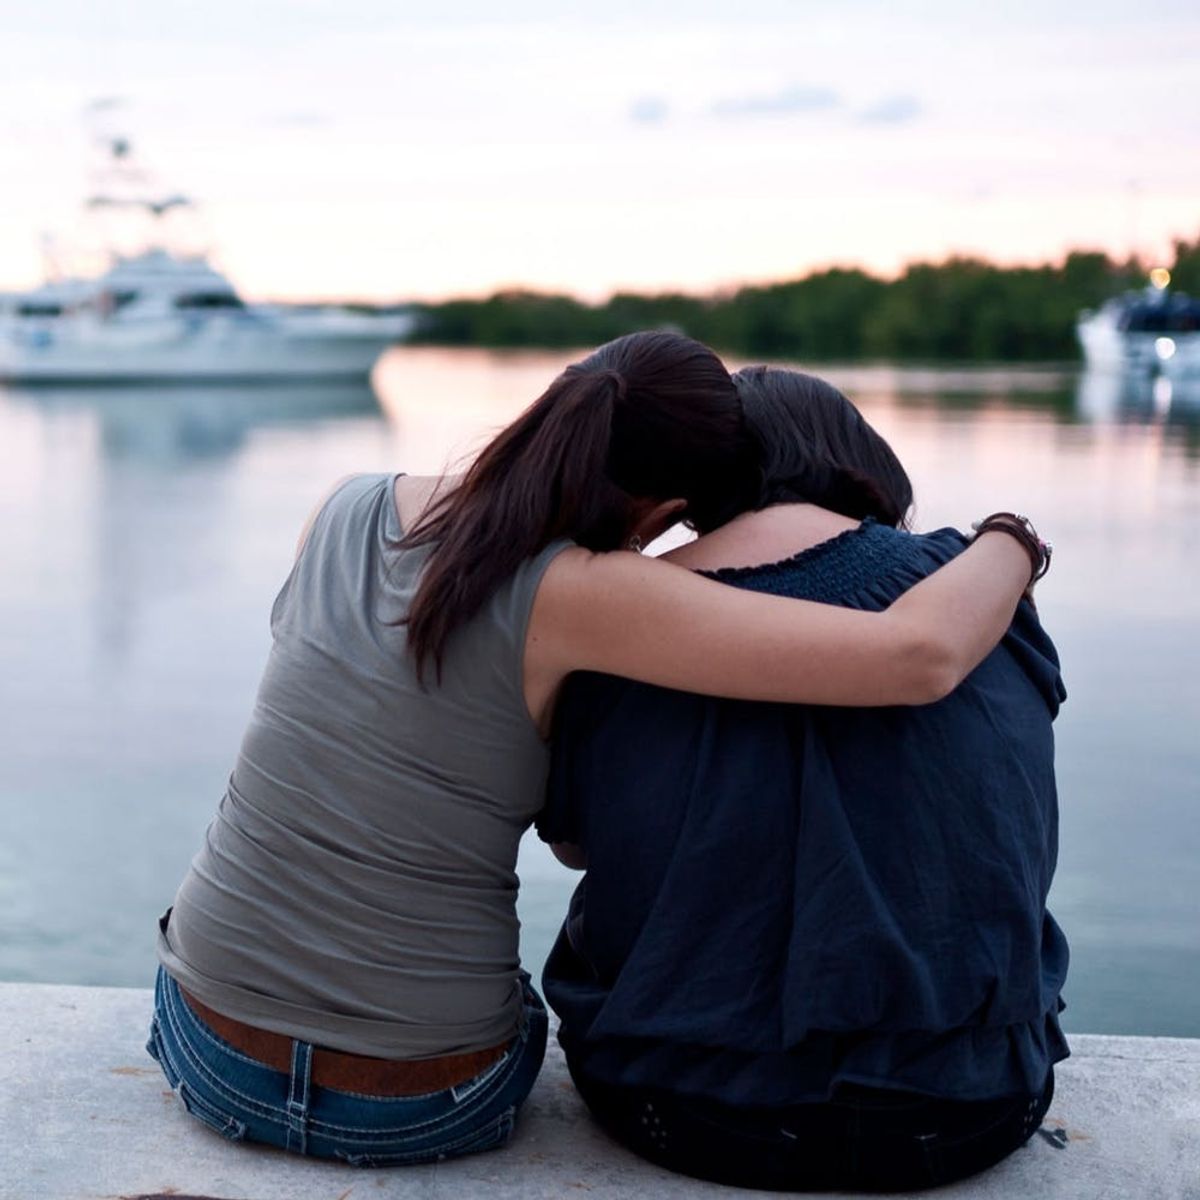 5 Real Ways to Help a Friend Who Is Depressed